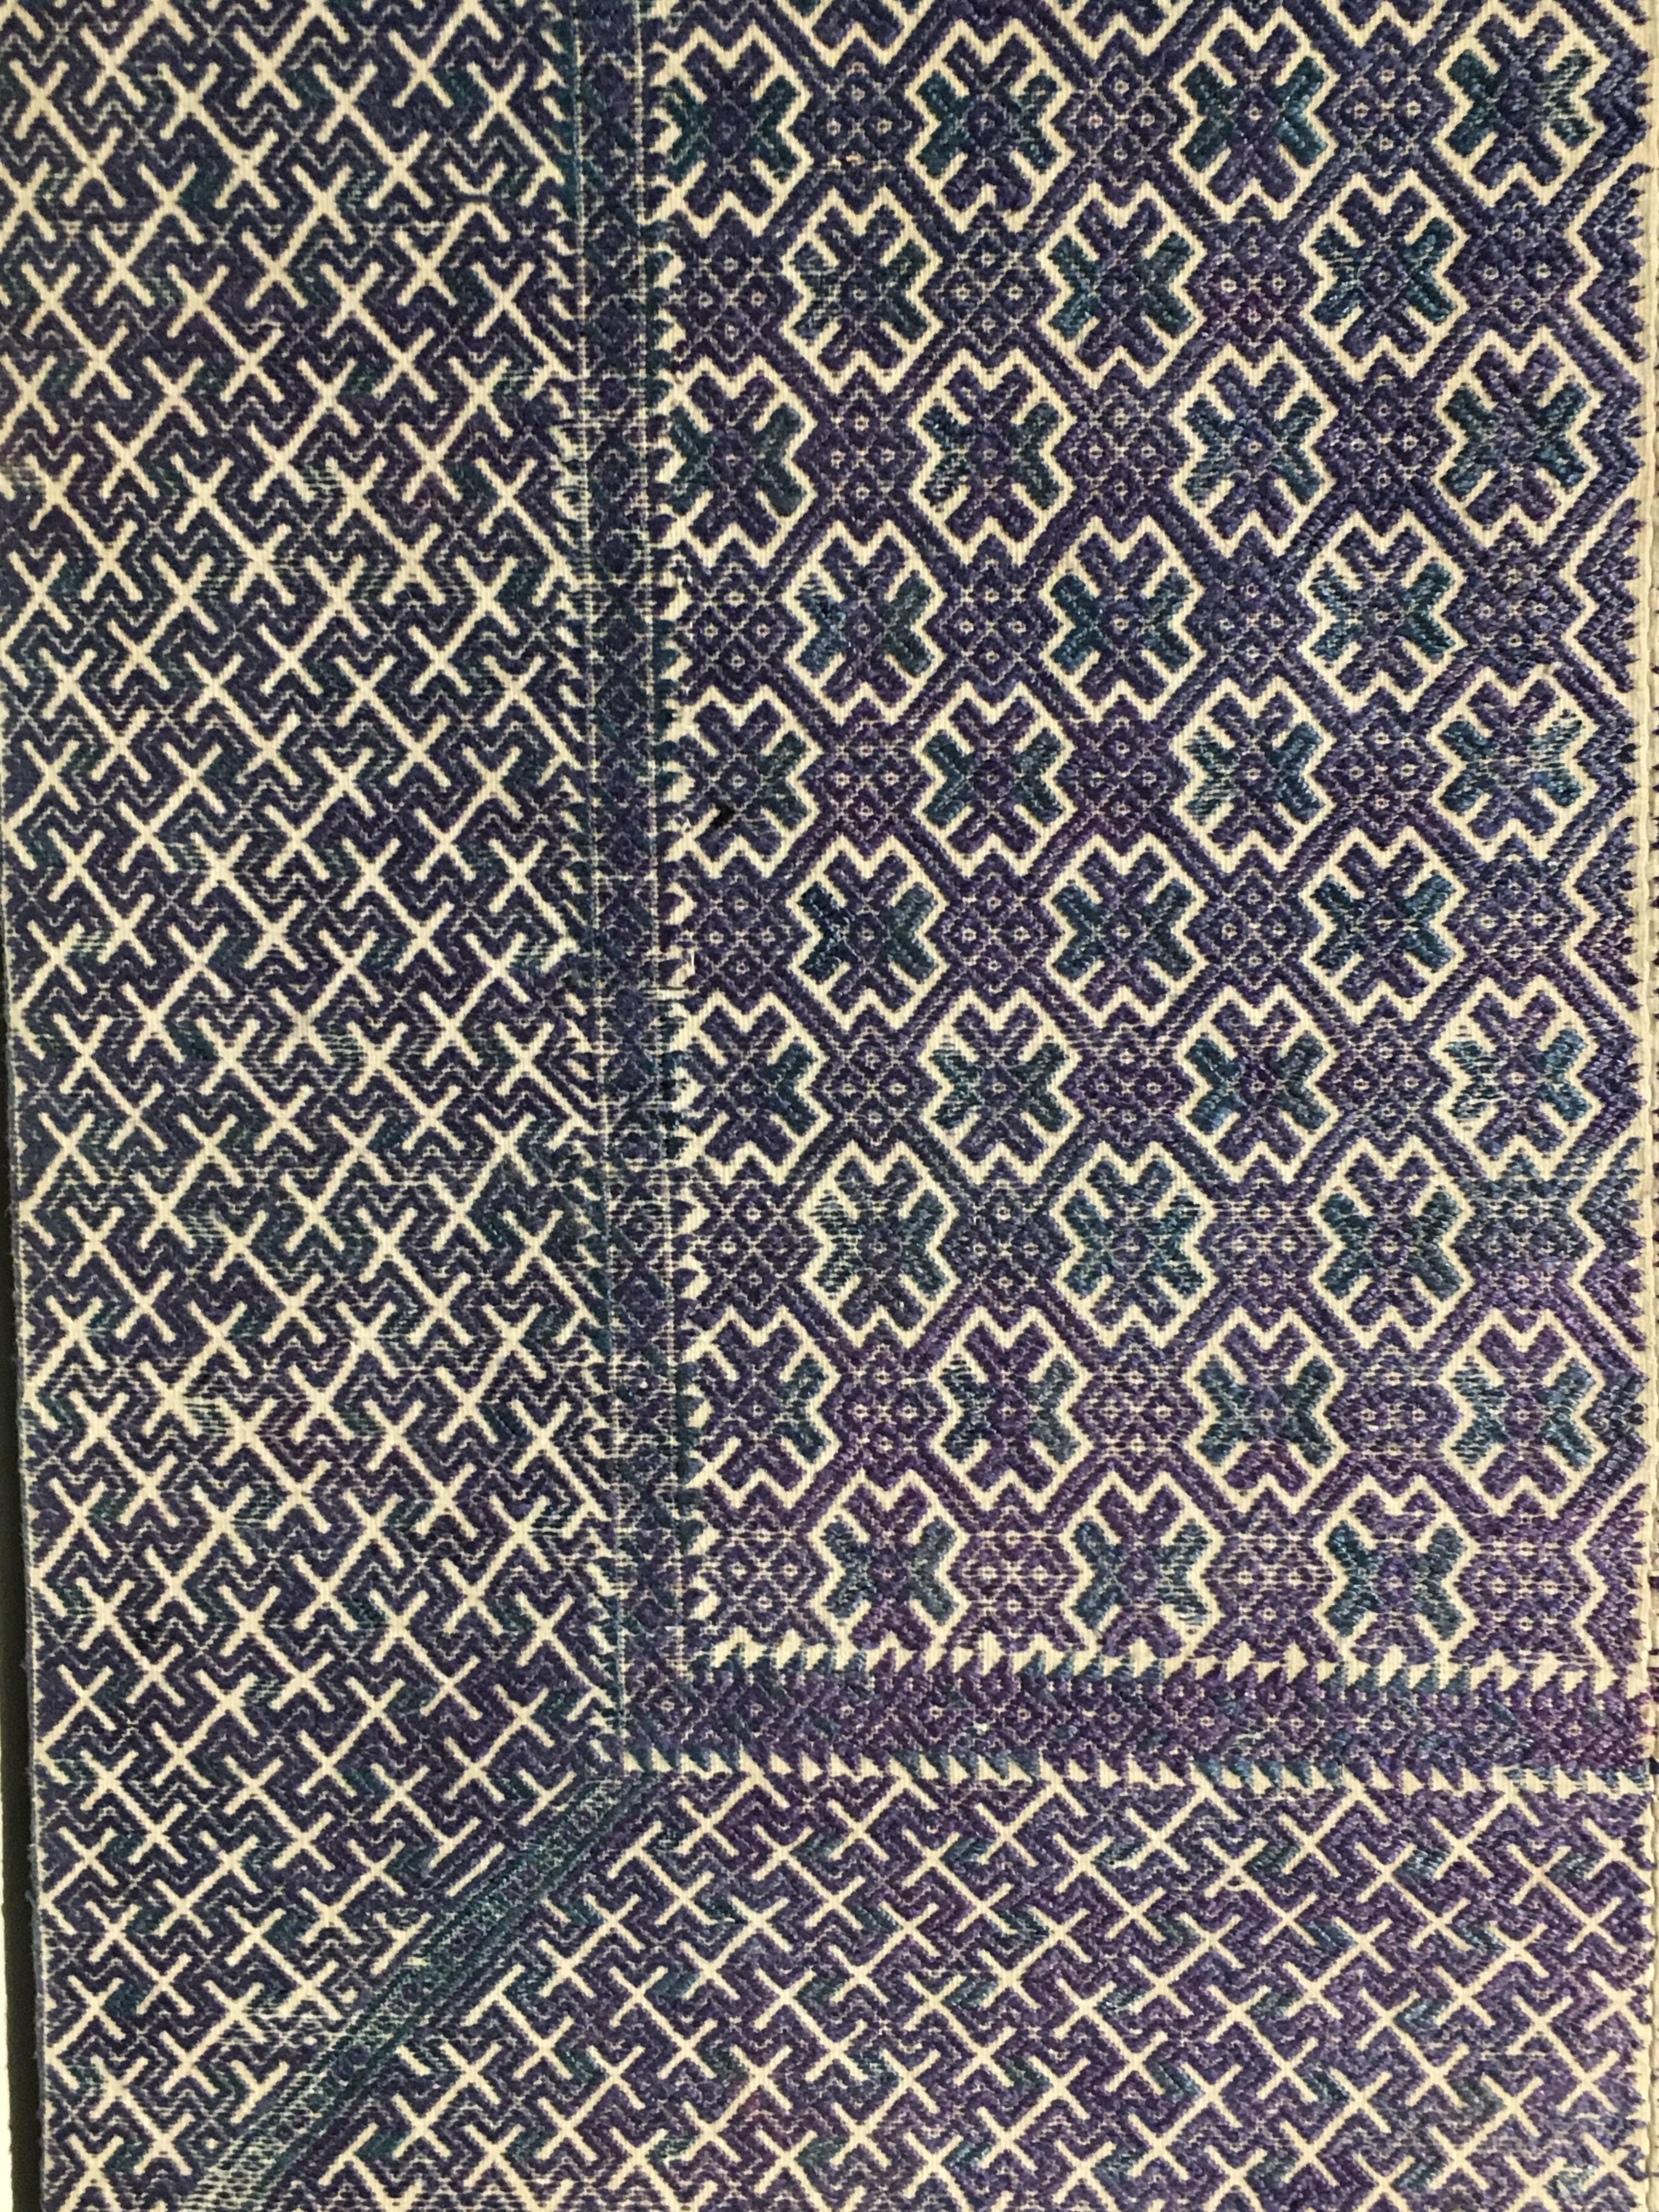 Hand-Woven Early 20th Century Chinese Zhuang Minority Wedding Blanket